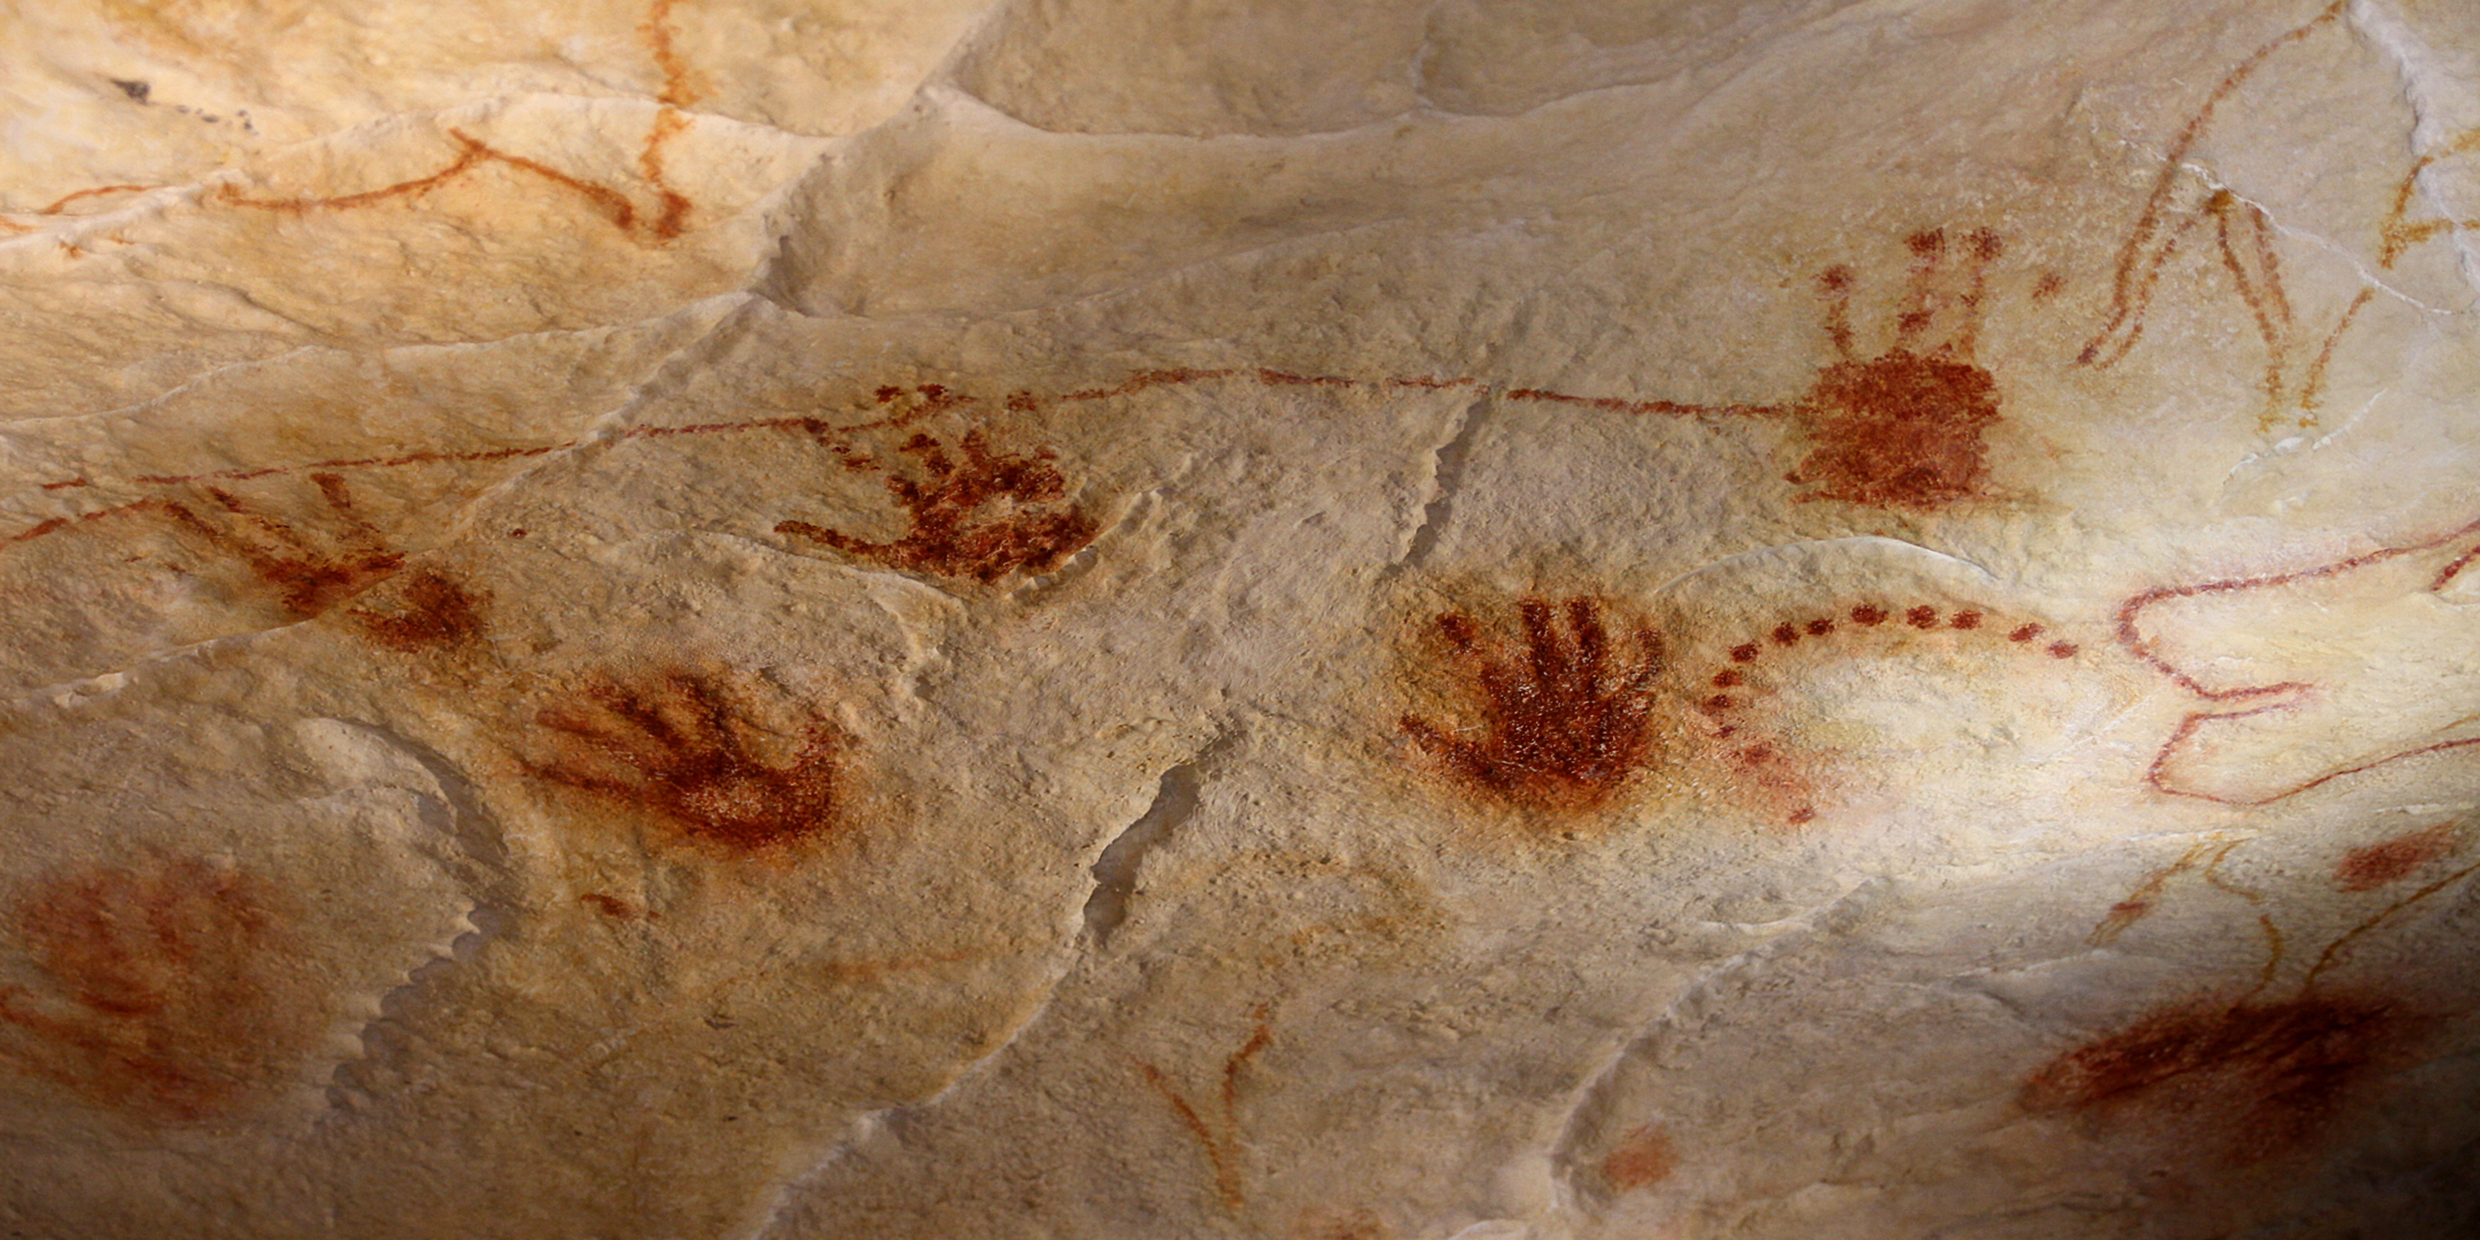 Image of human hand prints made on side of cave with red pigment